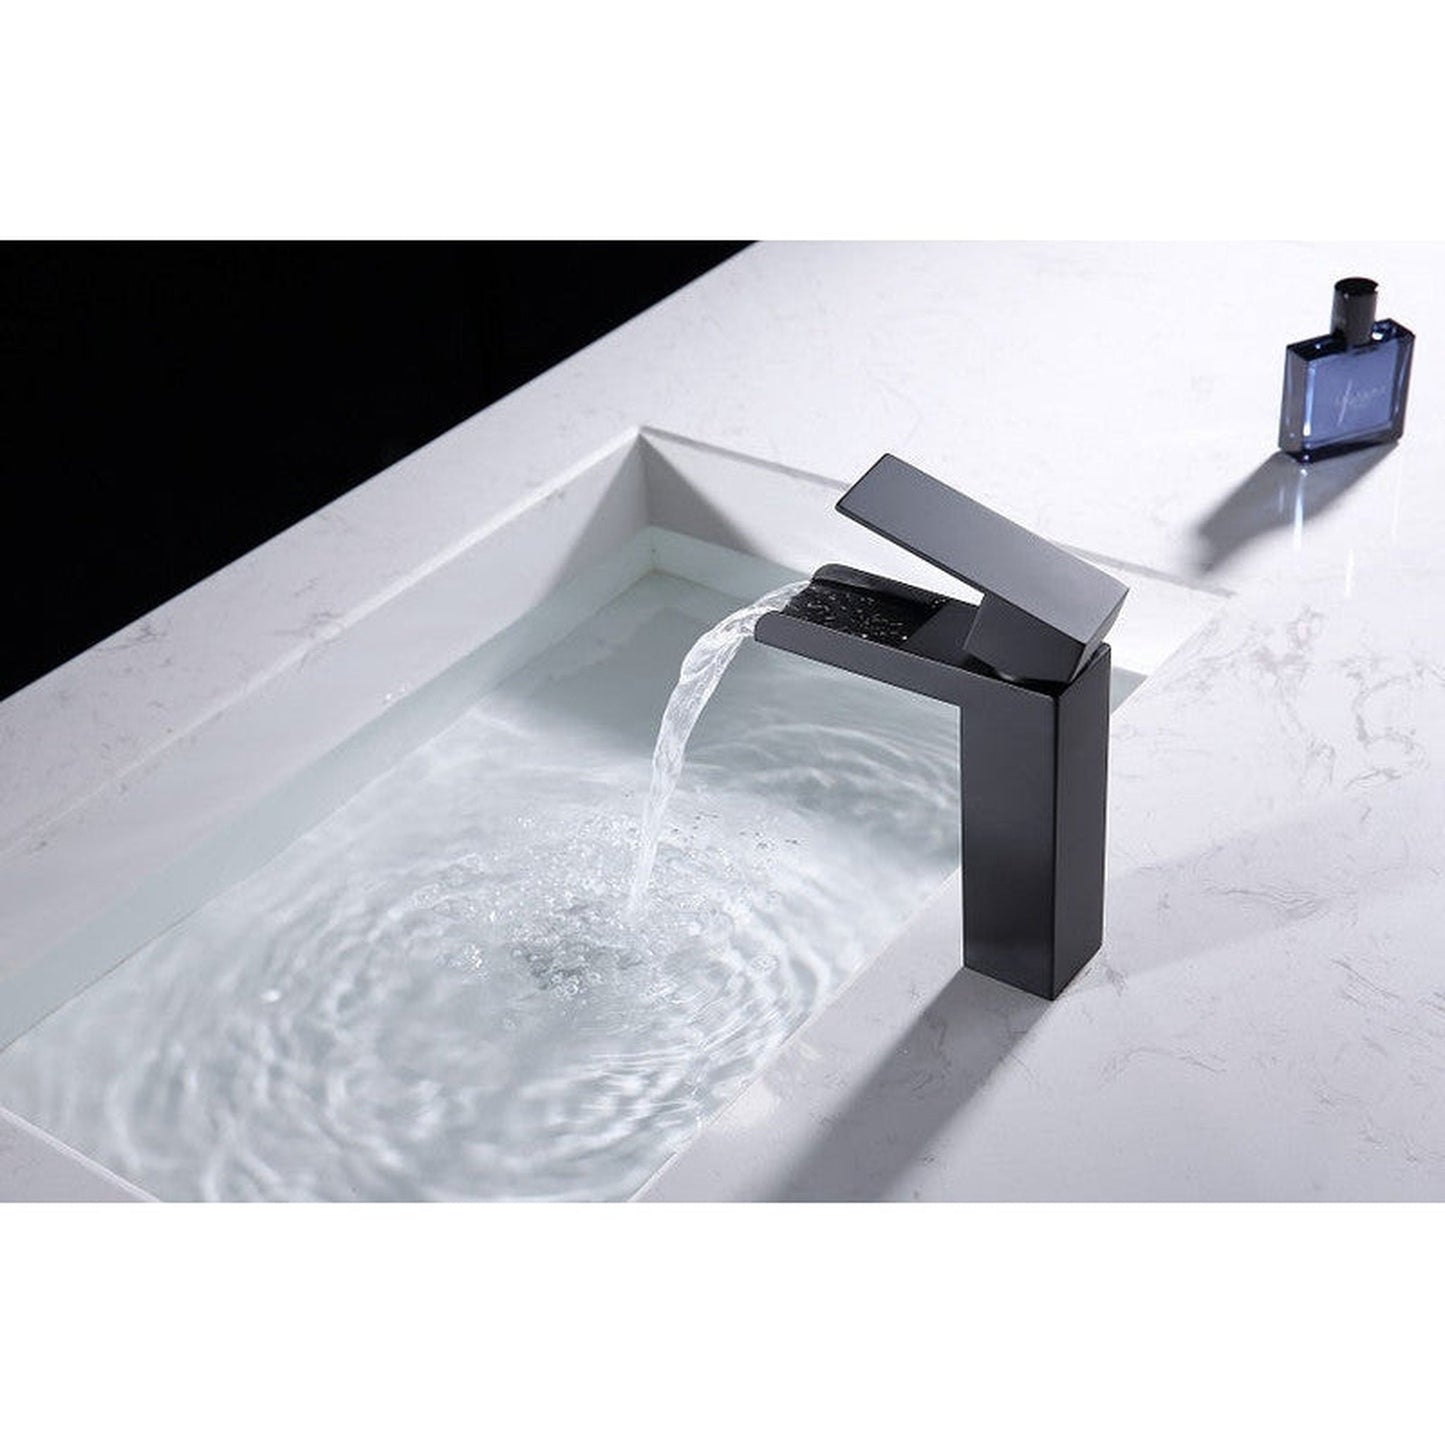 Moreno Nelli 6” x 7” Single Hole Matte Black Waterfall Faucet With Red/Blue Indicators